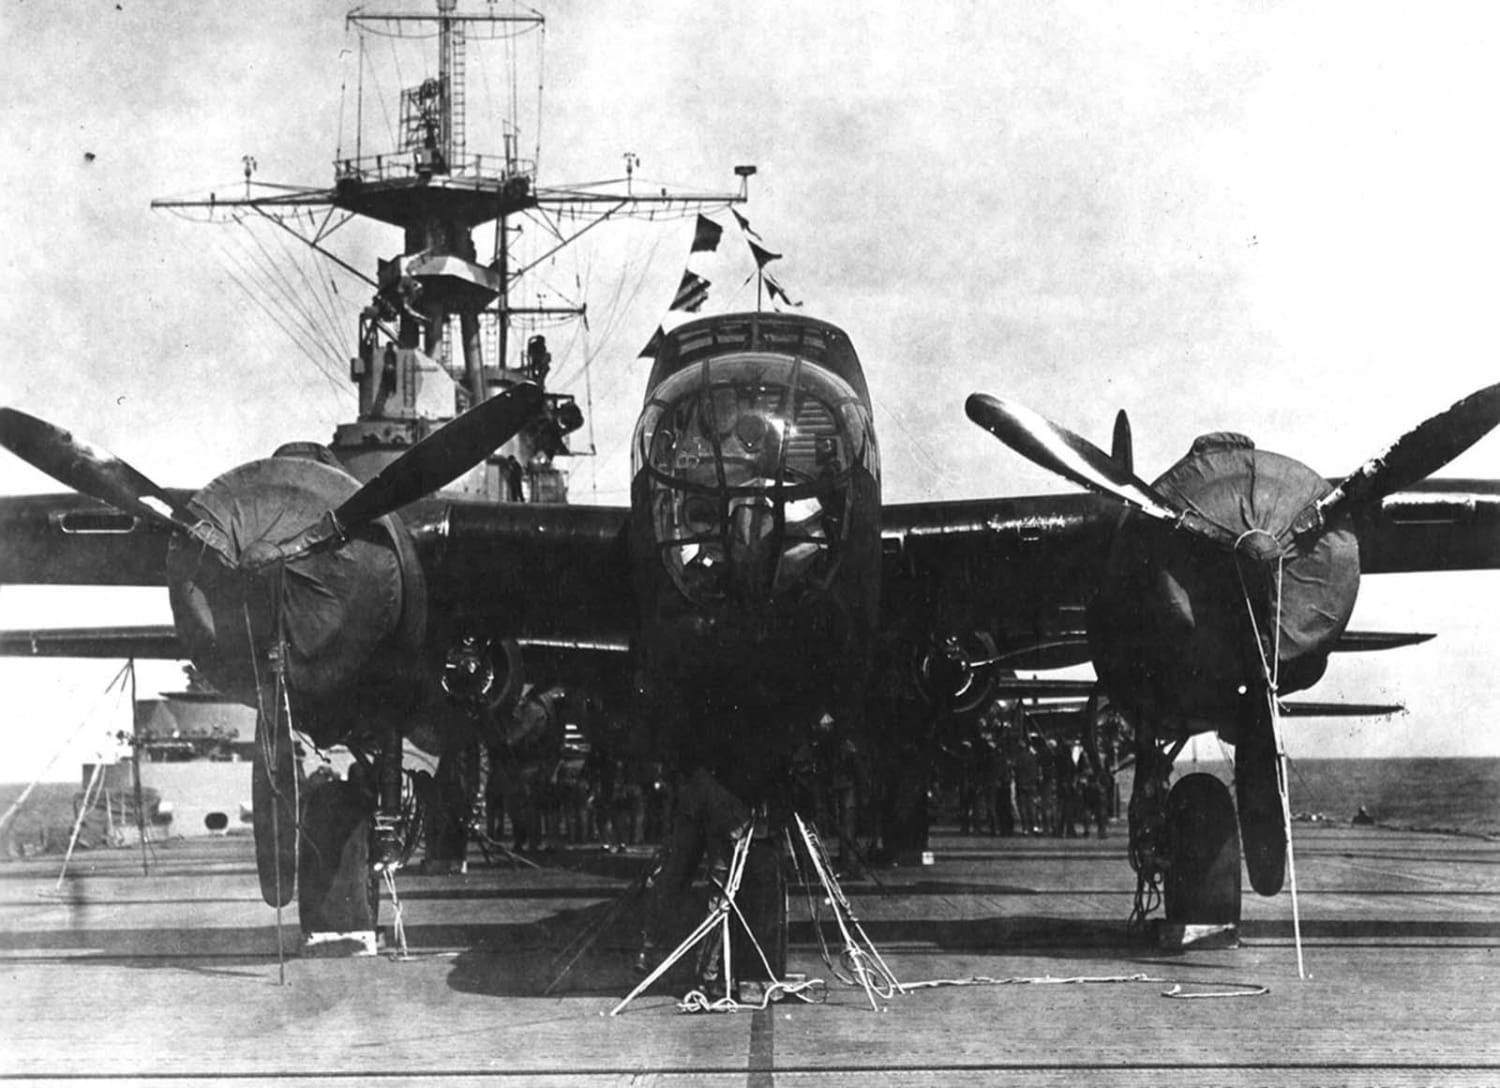 A crew member checks the lashings on his bomber aboard the USS Hornet, while behind him other crews check their planes in preparation for the Doolittle Raid on 18 April 1942